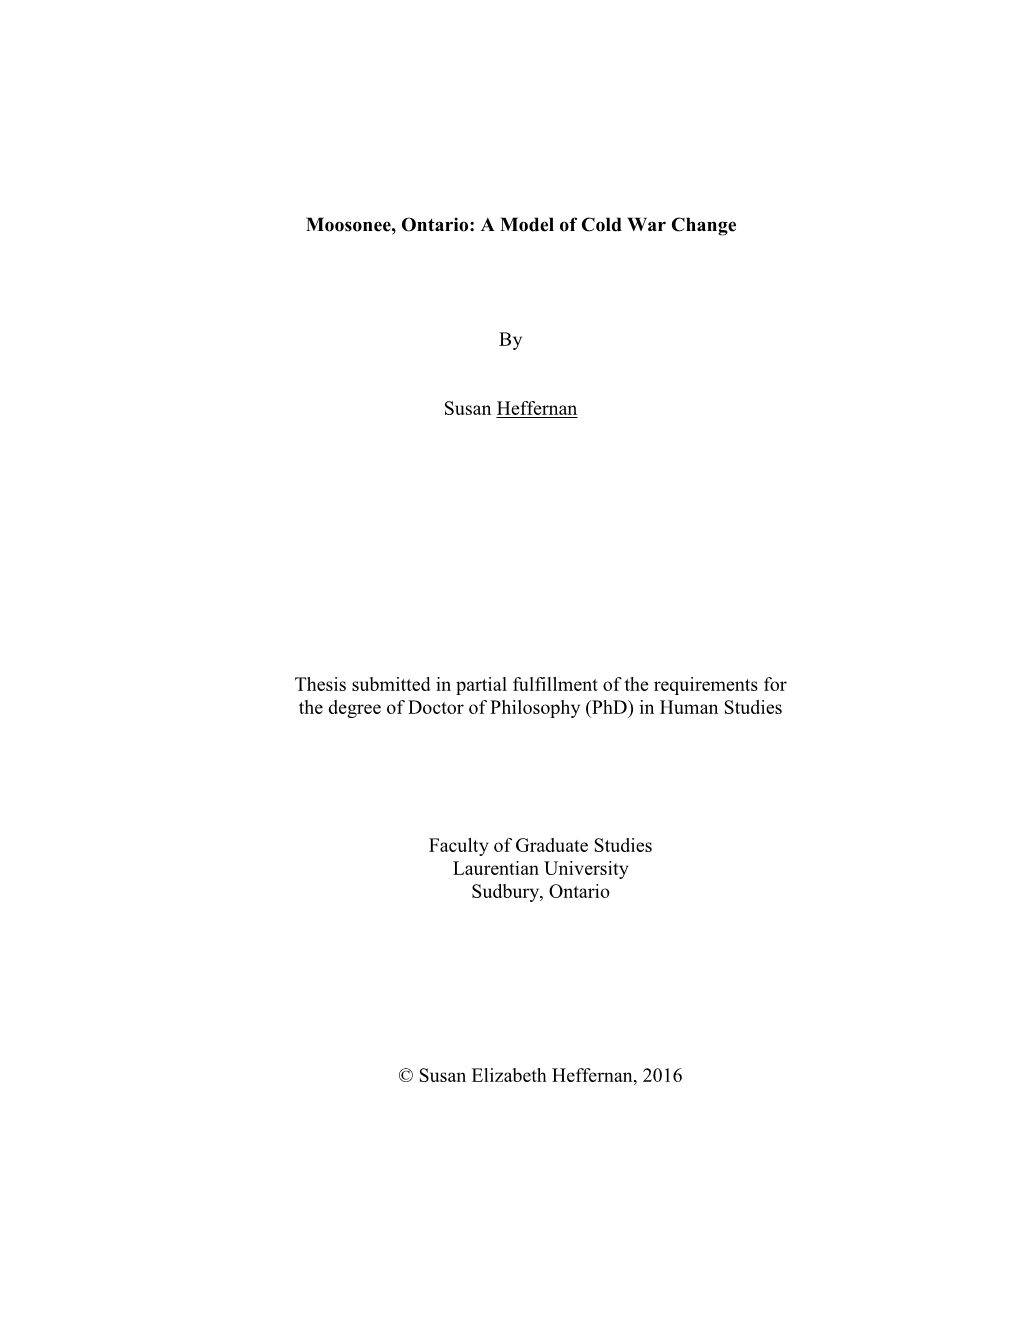 Moosonee, Ontario: a Model of Cold War Change by Susan Heffernan Thesis Submitted in Partial Fulfillment of the Requirements